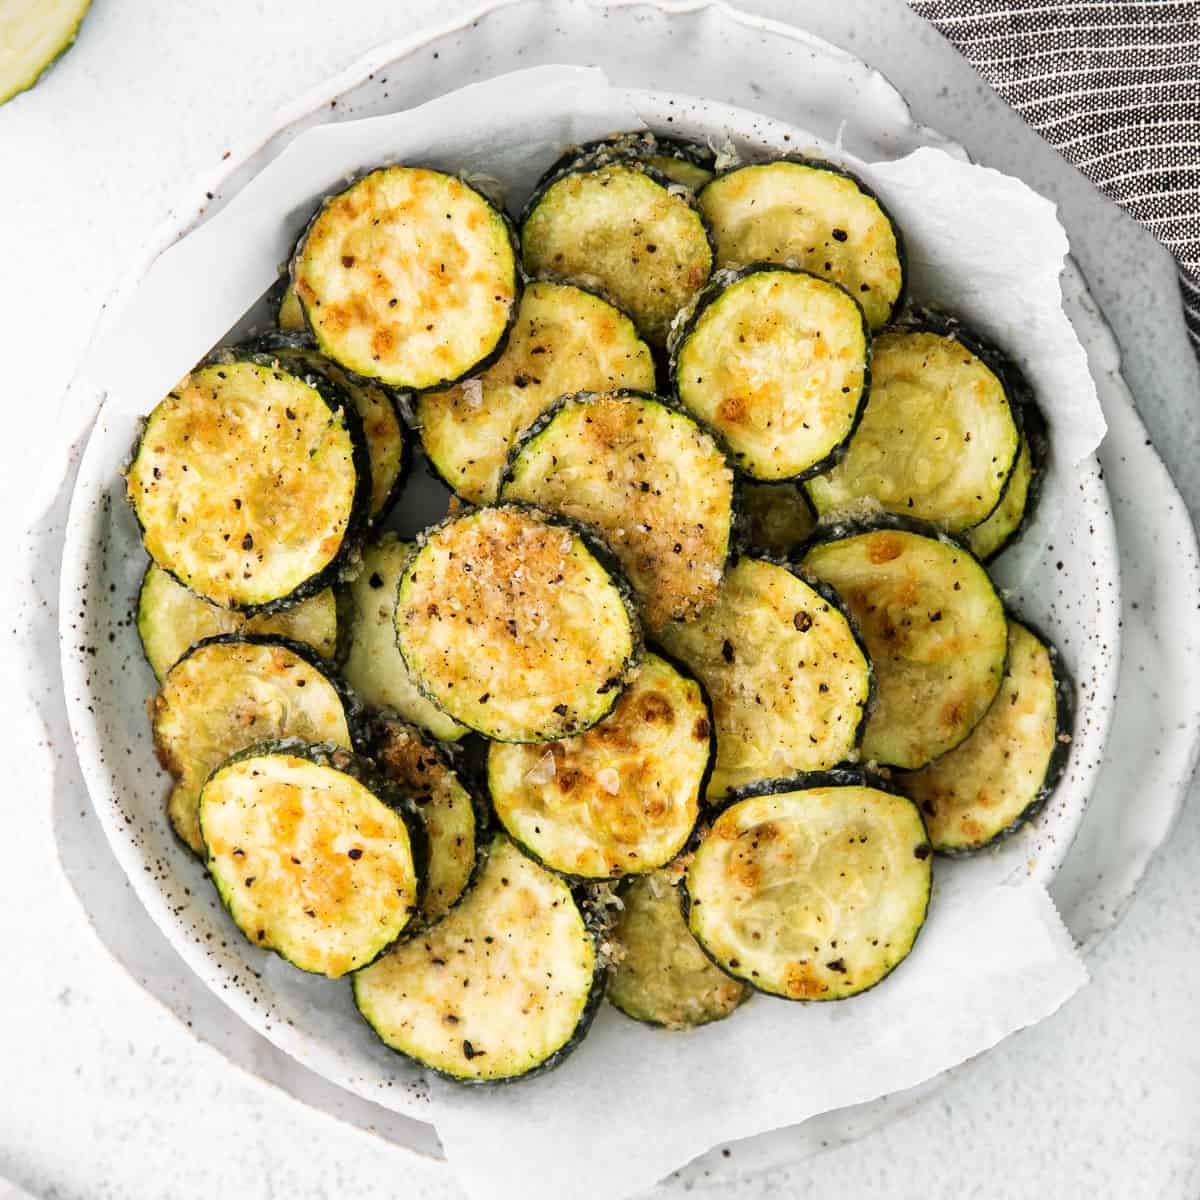 https://fitfoodiefinds.com/wp-content/uploads/2021/07/Baked-Zucchini-04.jpg